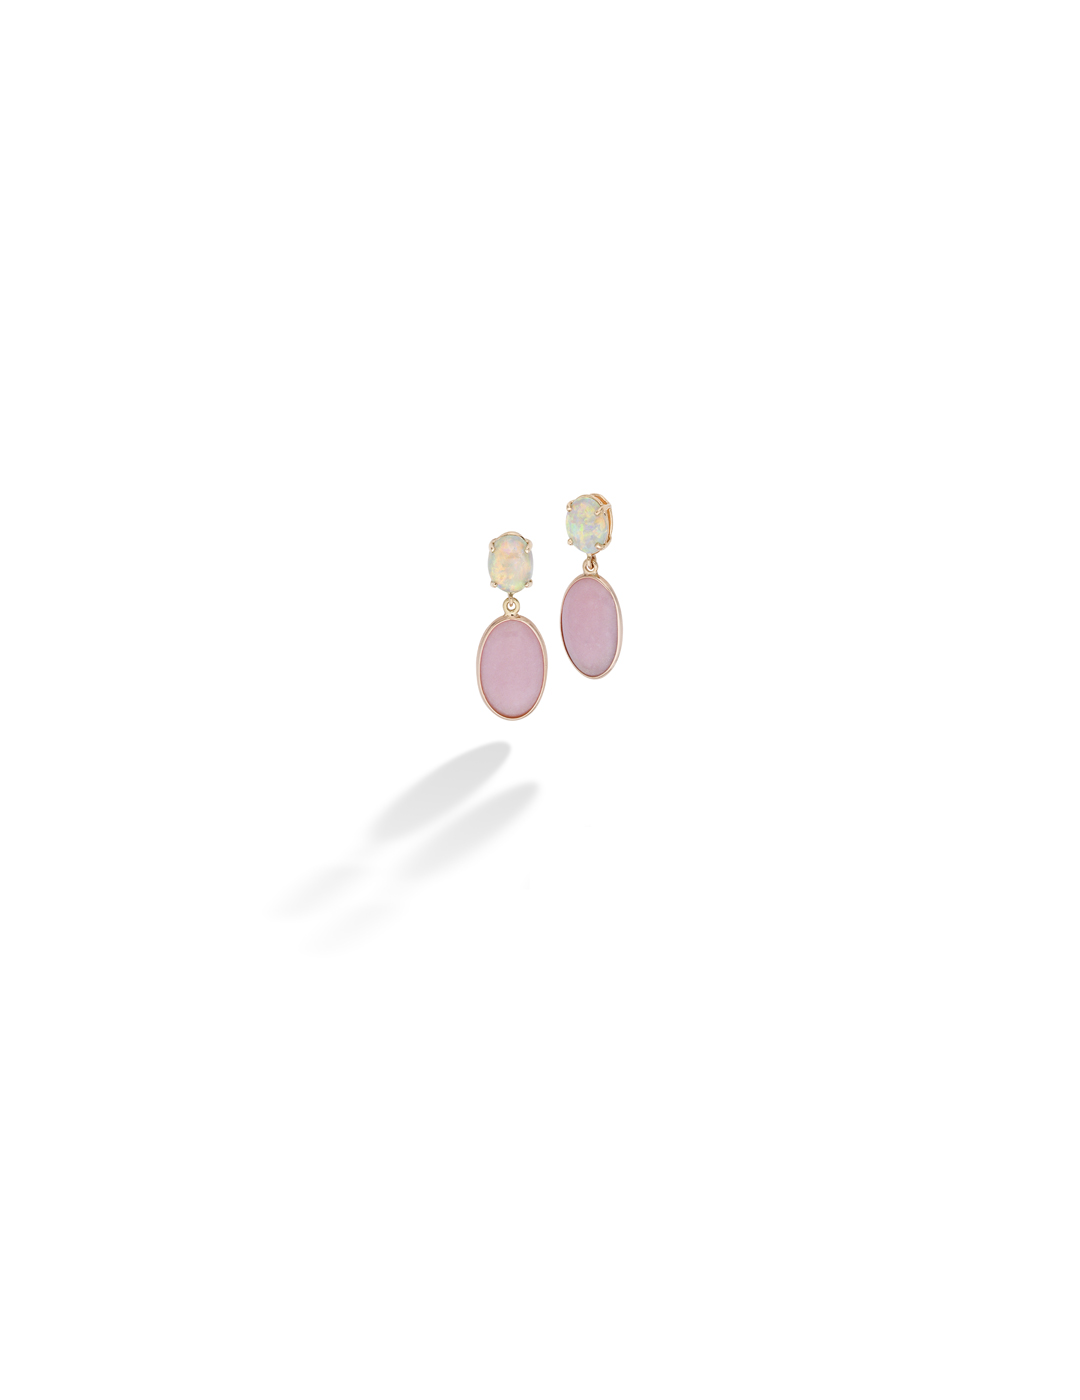 mish_products_earrings_Mini Montreux-PinkOpl-ER-1